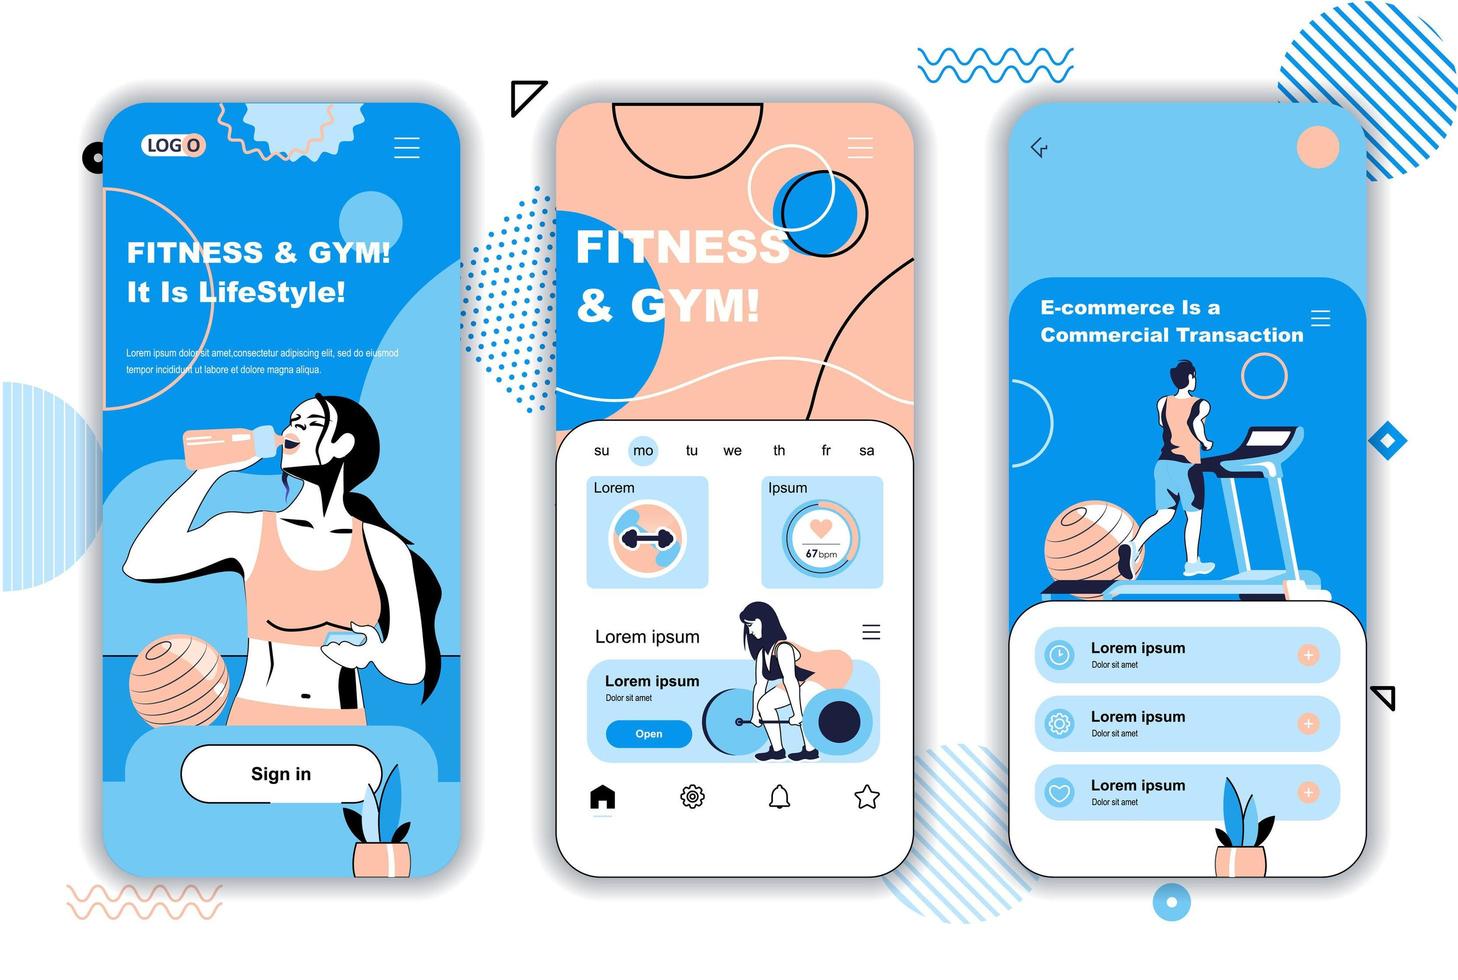 Fitness and gym concept onboarding screens for mobile app templates. Athletes do exercise and workout activity. UI, UX, GUI user interface kit with people scenes for web design. Vector illustration